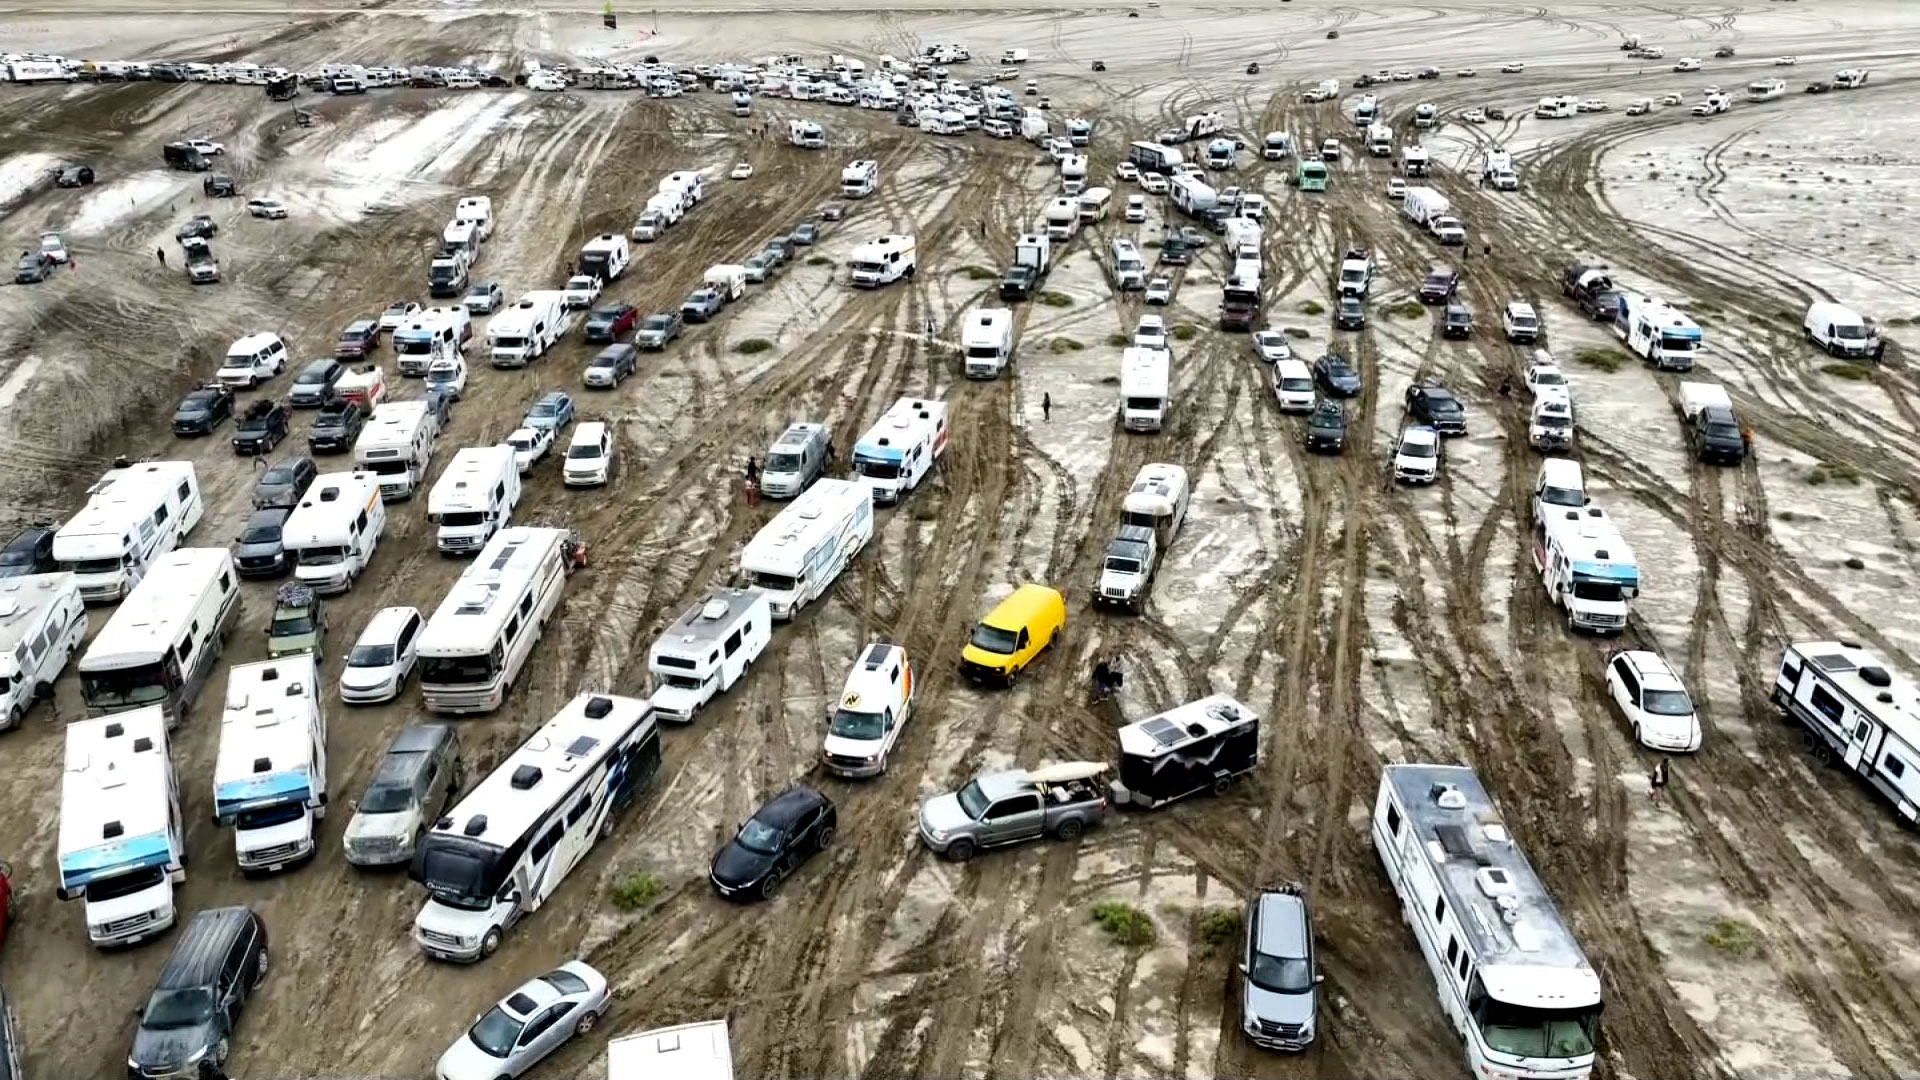 How many people are currently trapped at Burning Man? ABTC